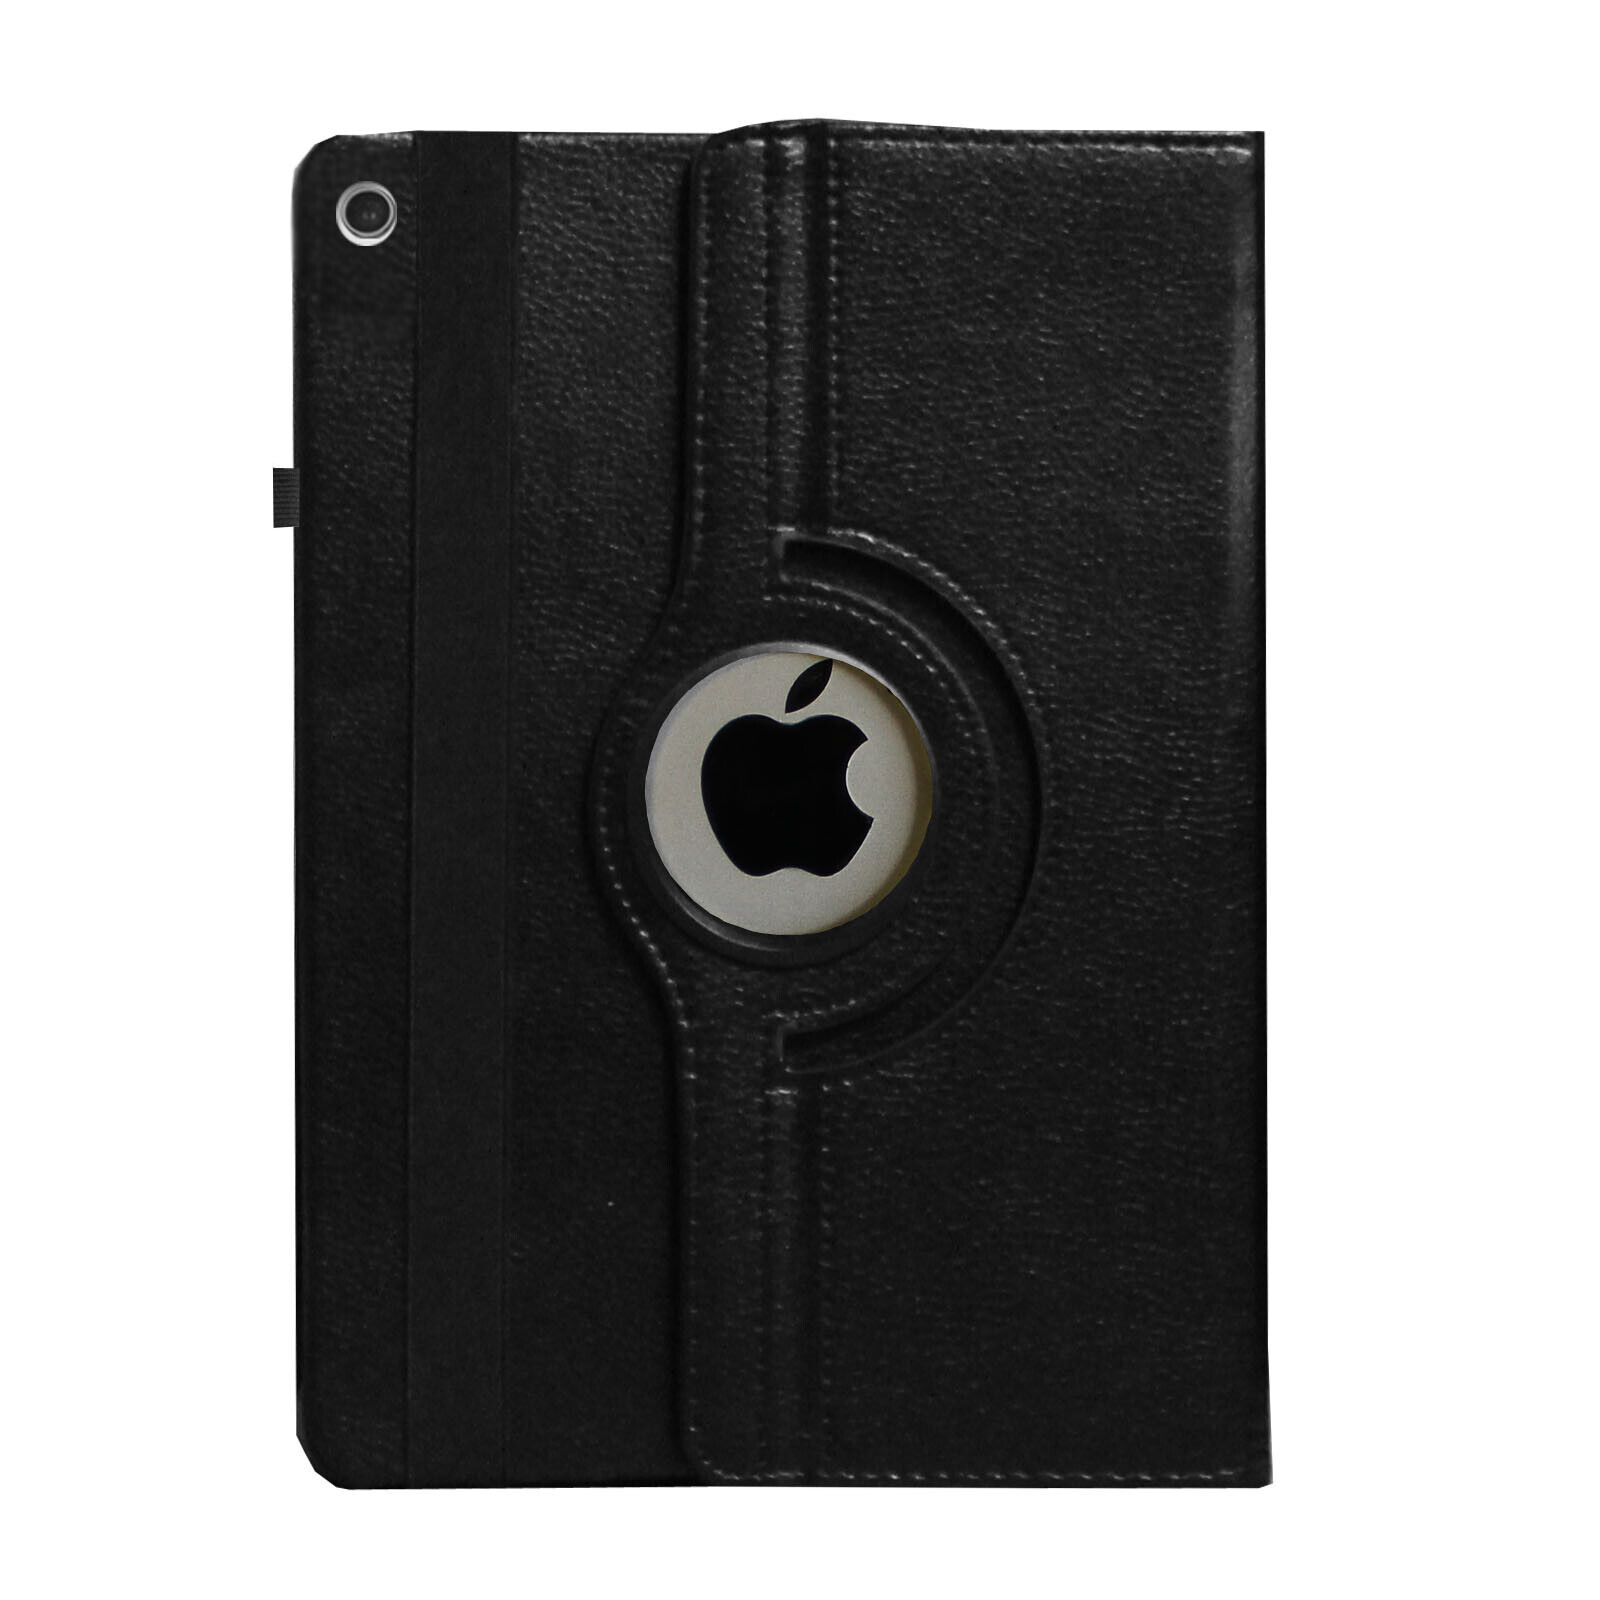 JYtrend Case for Old iPad 2 3 4 (2011-2012) Smart Rotating cover with Pen Holder